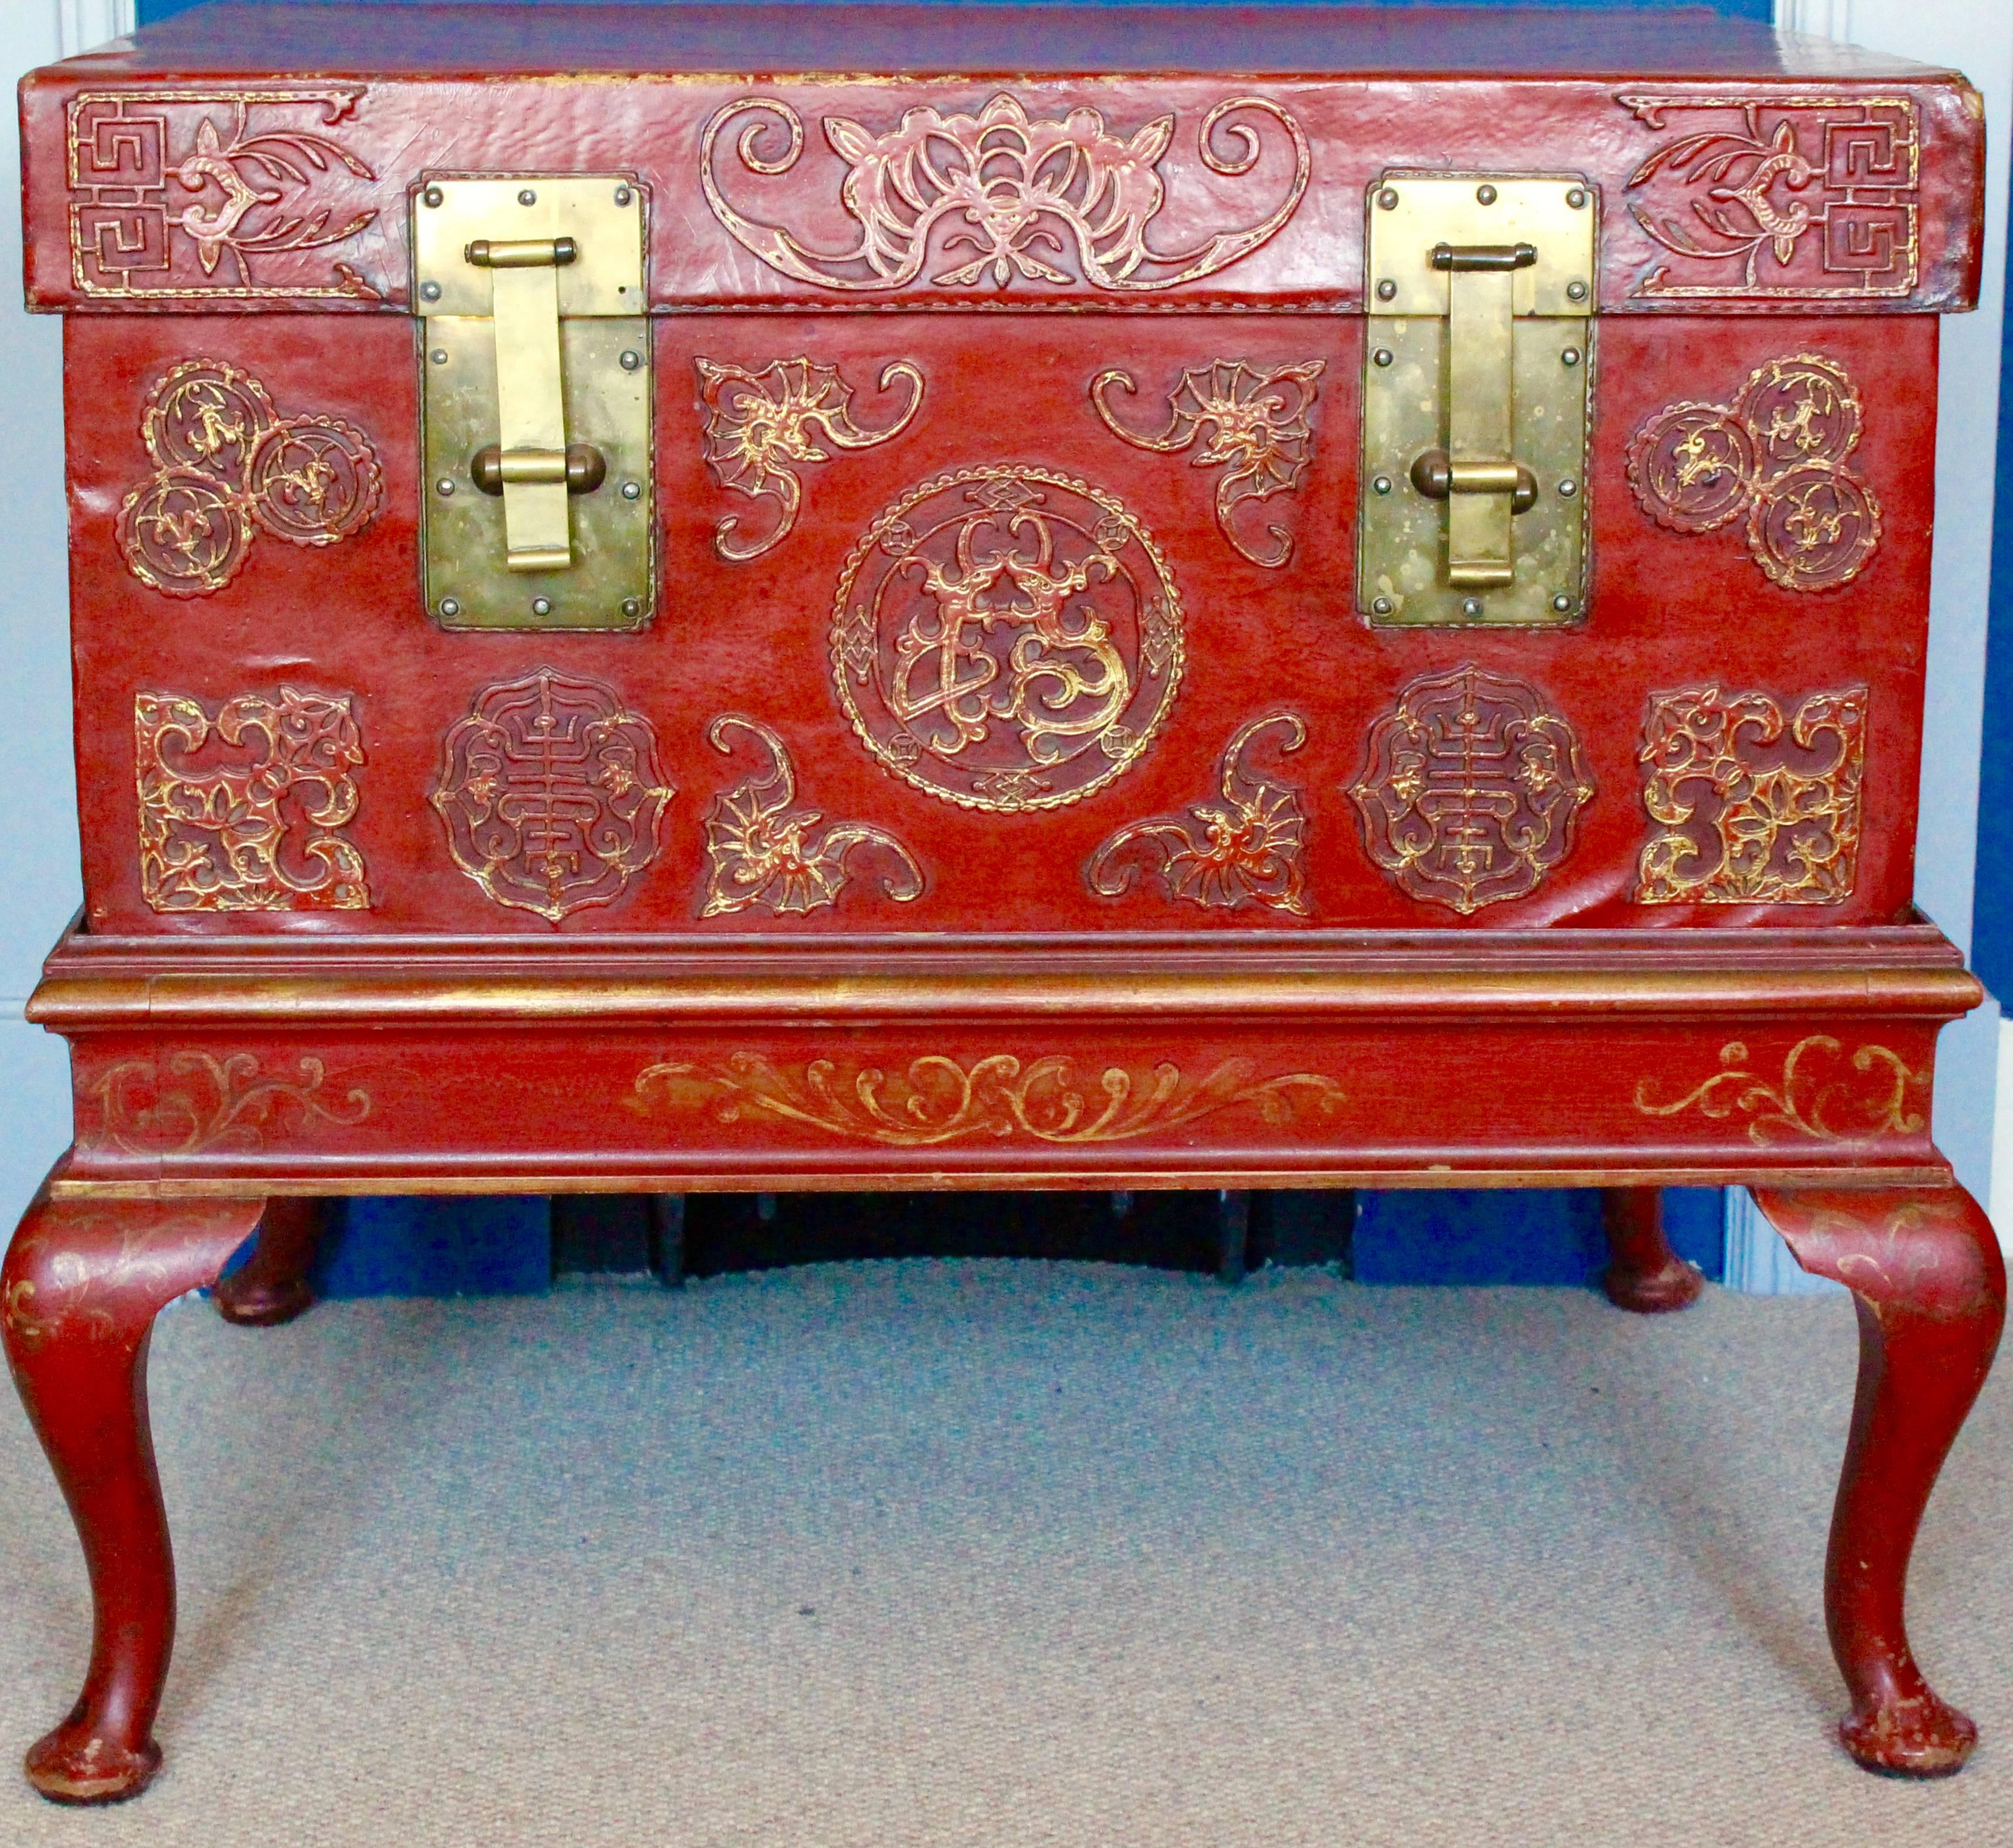 A highly decorative pair of Chinese red leather trunks. Each finished in a red lacquer, richly decorated with auspicious symbols in gilt highlight, the bats and Shou characters believed to bring good fortune and longevity. Each trunk has brass